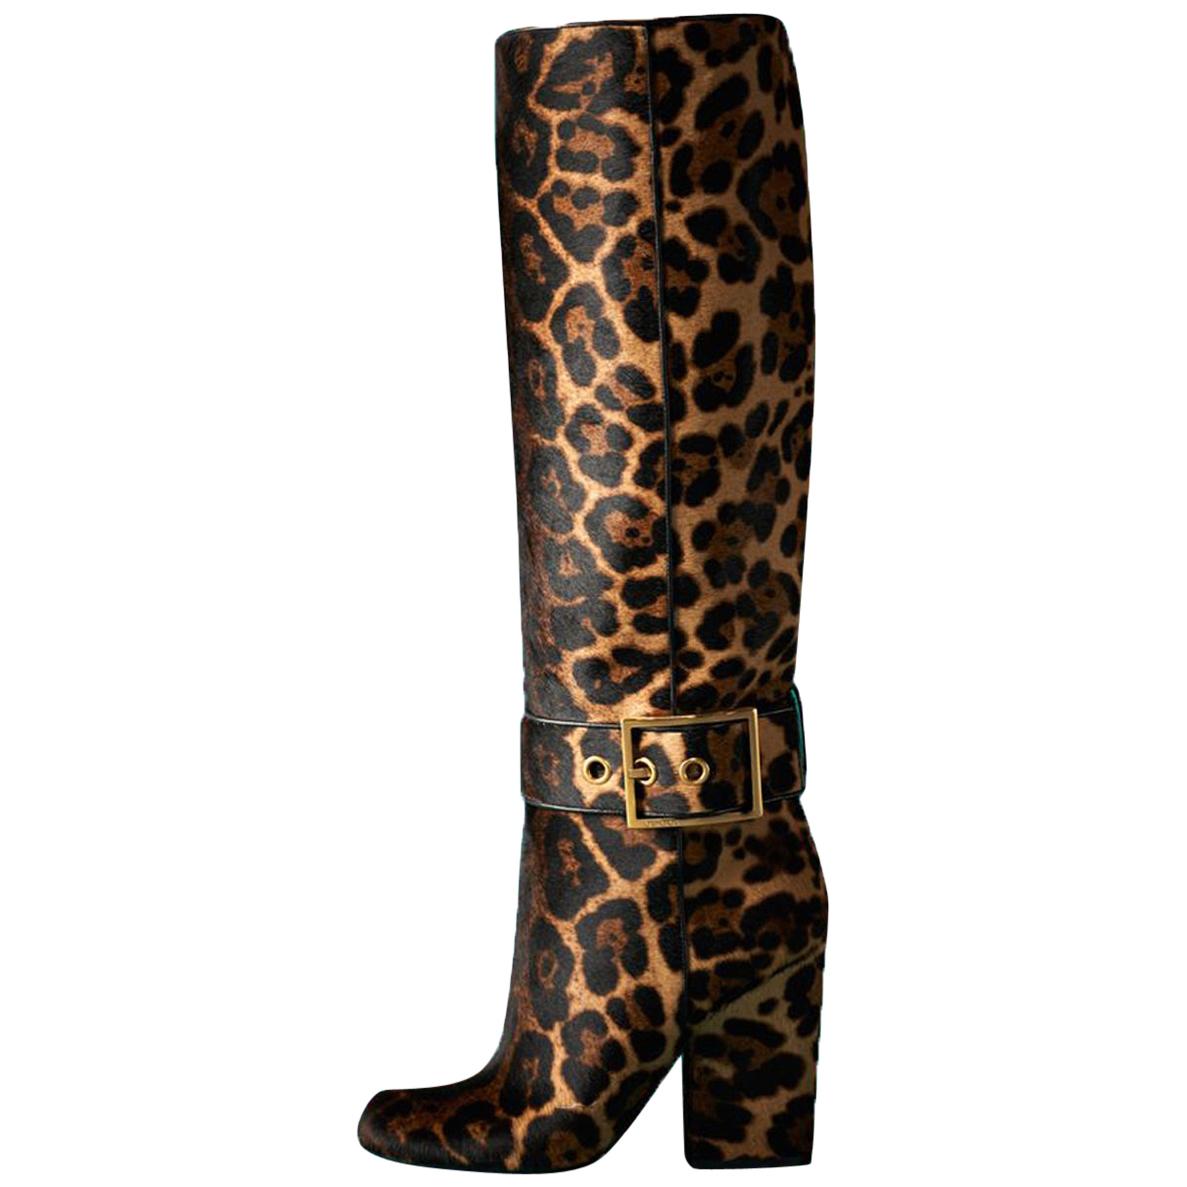 New GUCCI Fur Leather Jaguar Print Buckle Knee Tall Boots It. 36 - US 6 For Sale